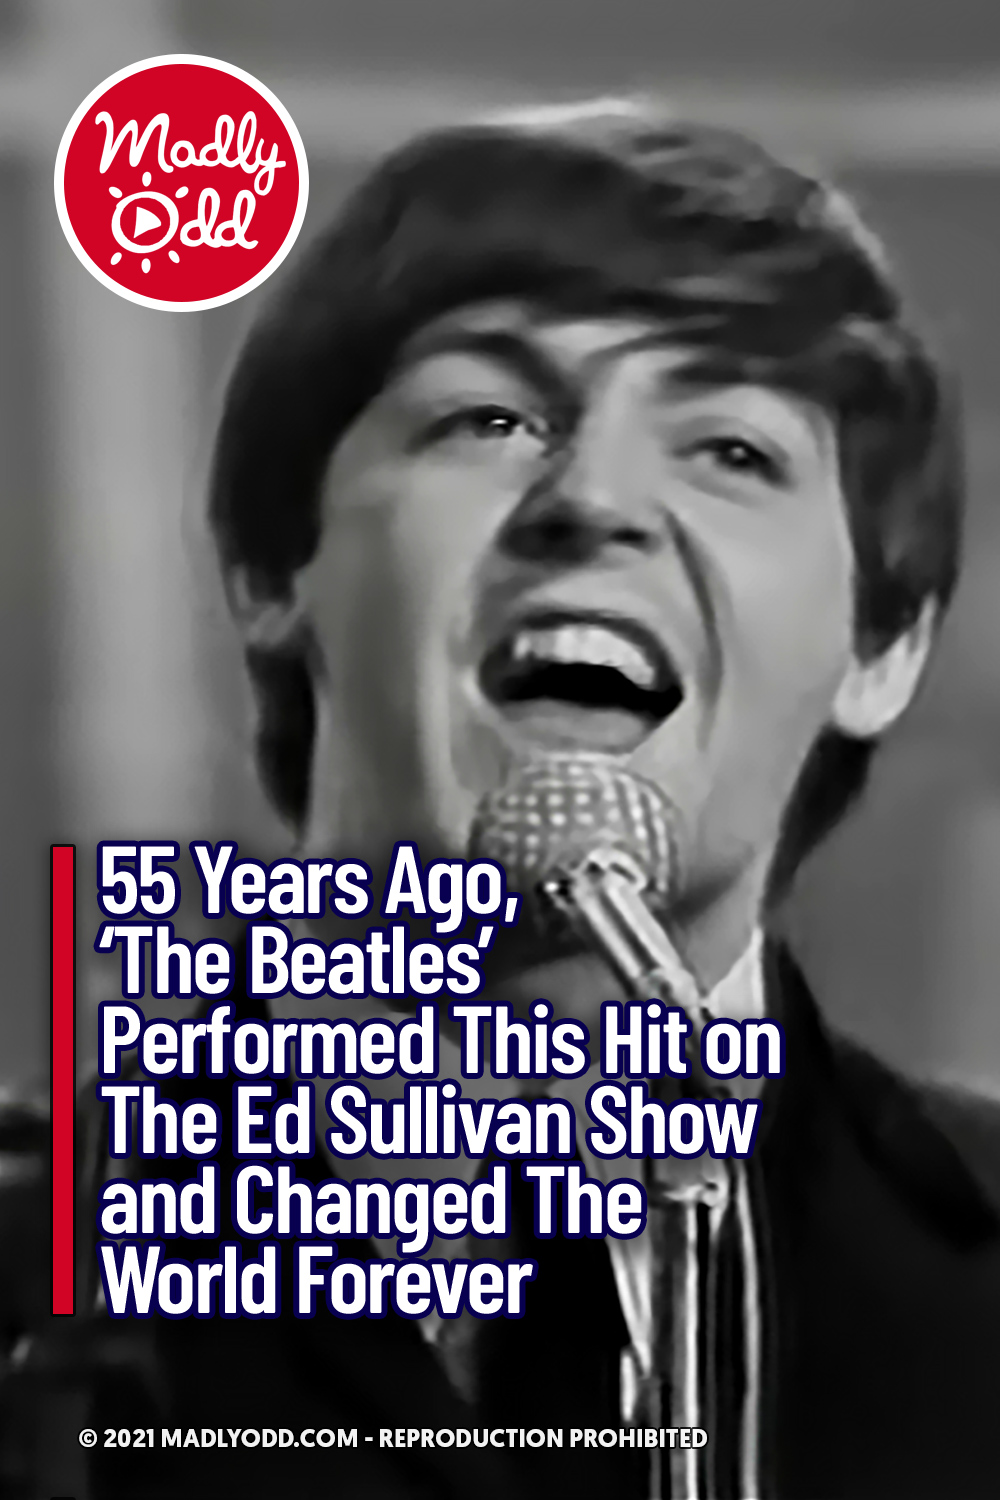 \'The Beatles\' Performed This Hit on The Ed Sullivan Show and Changed The World Forever